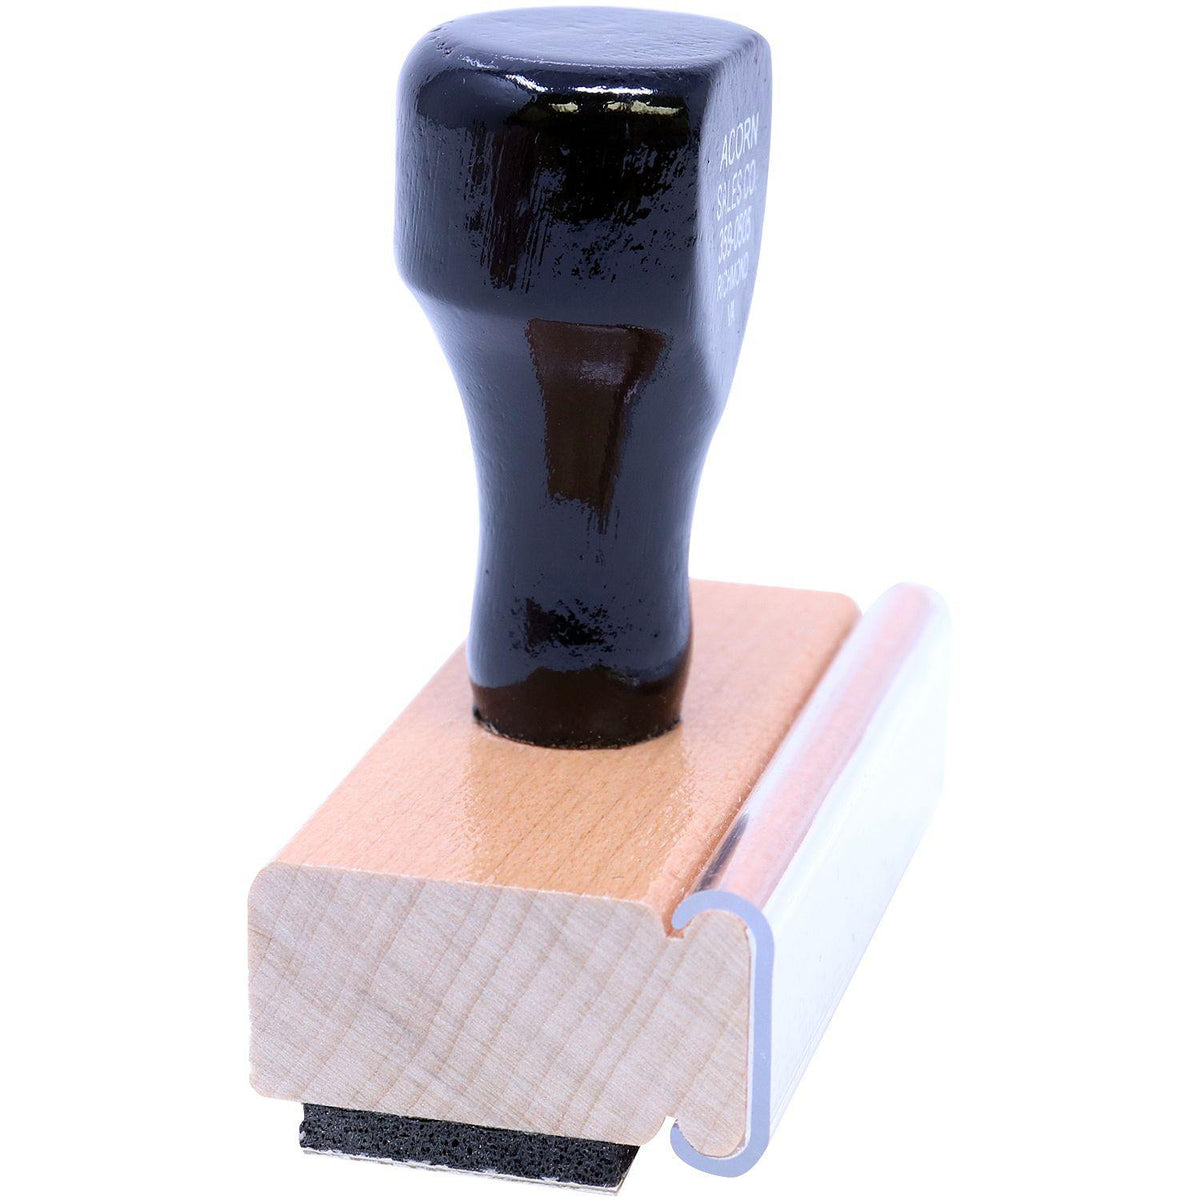 Side View of Large Late Rubber Stamp at an Angle